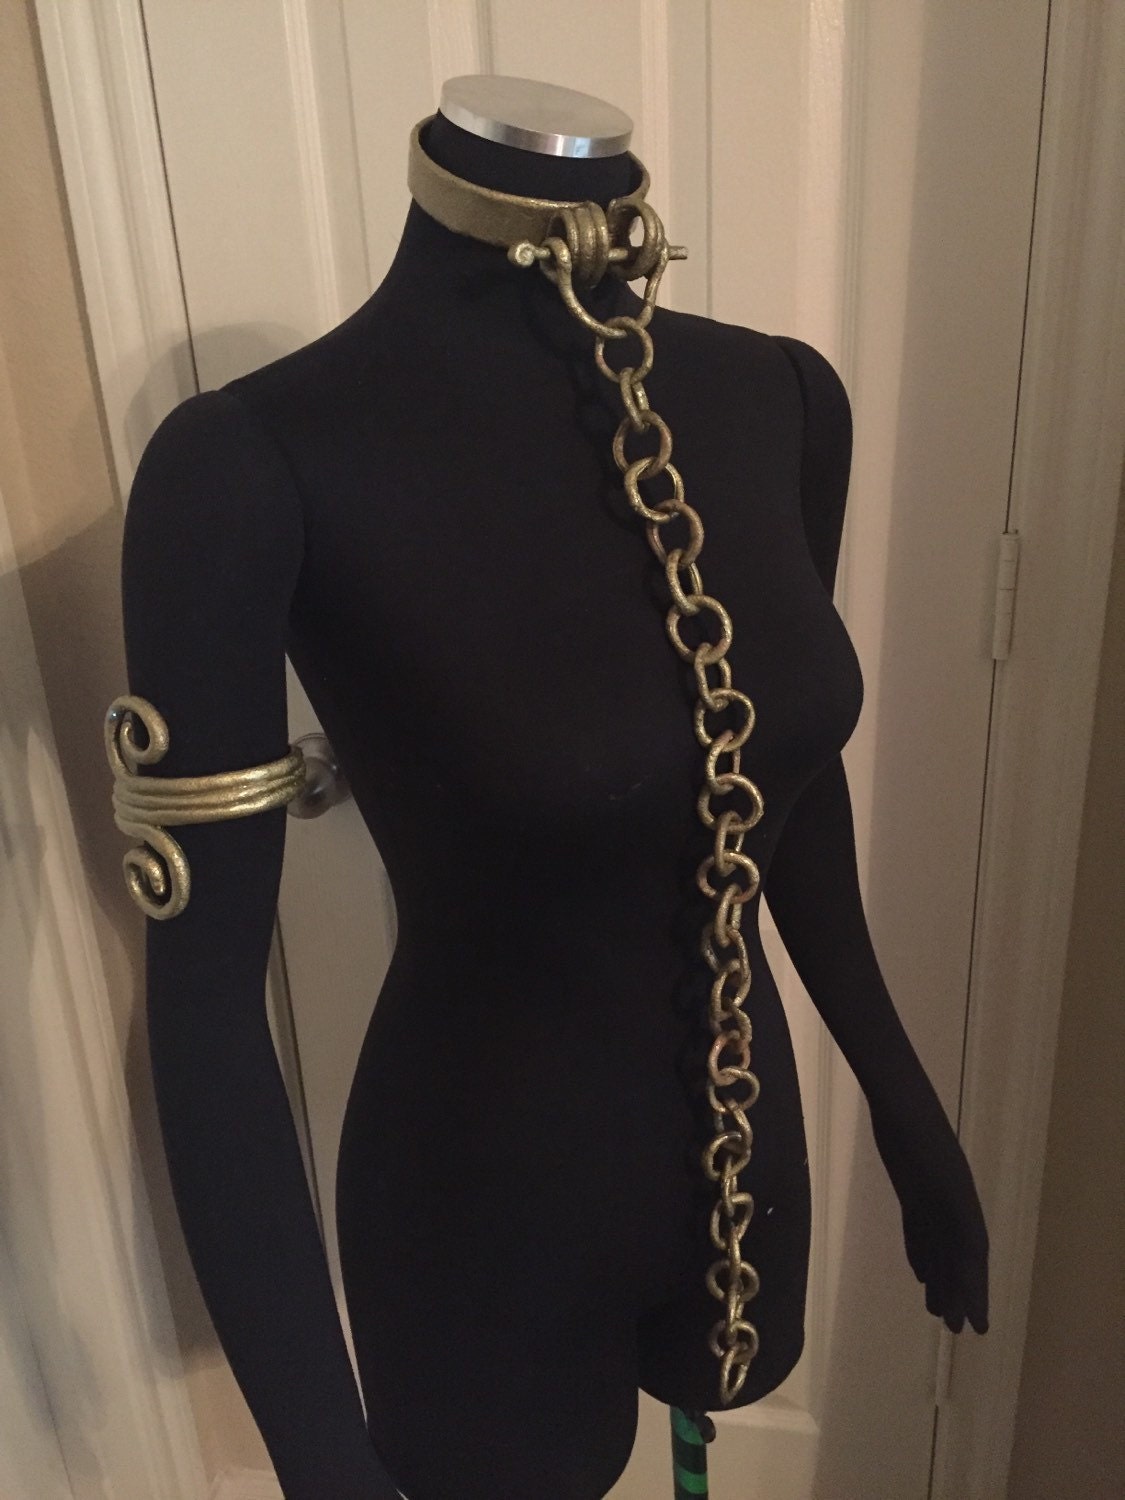 for Slave leia sale cosplay